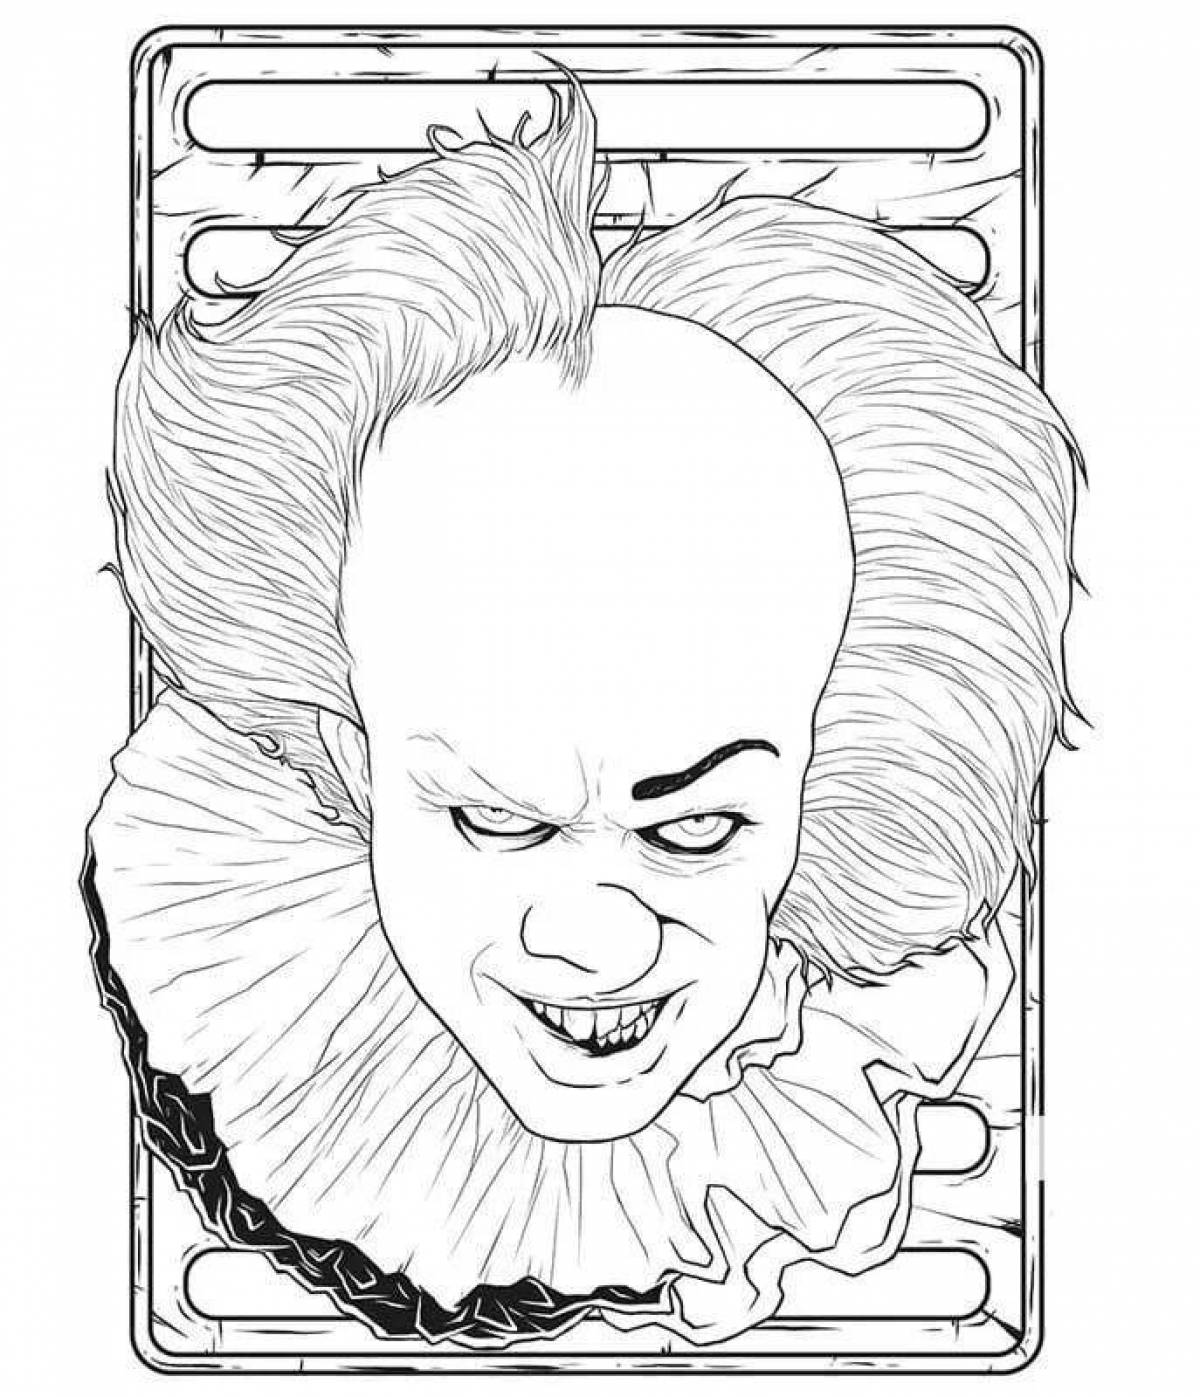 Pennywise the clown creepy coloring book